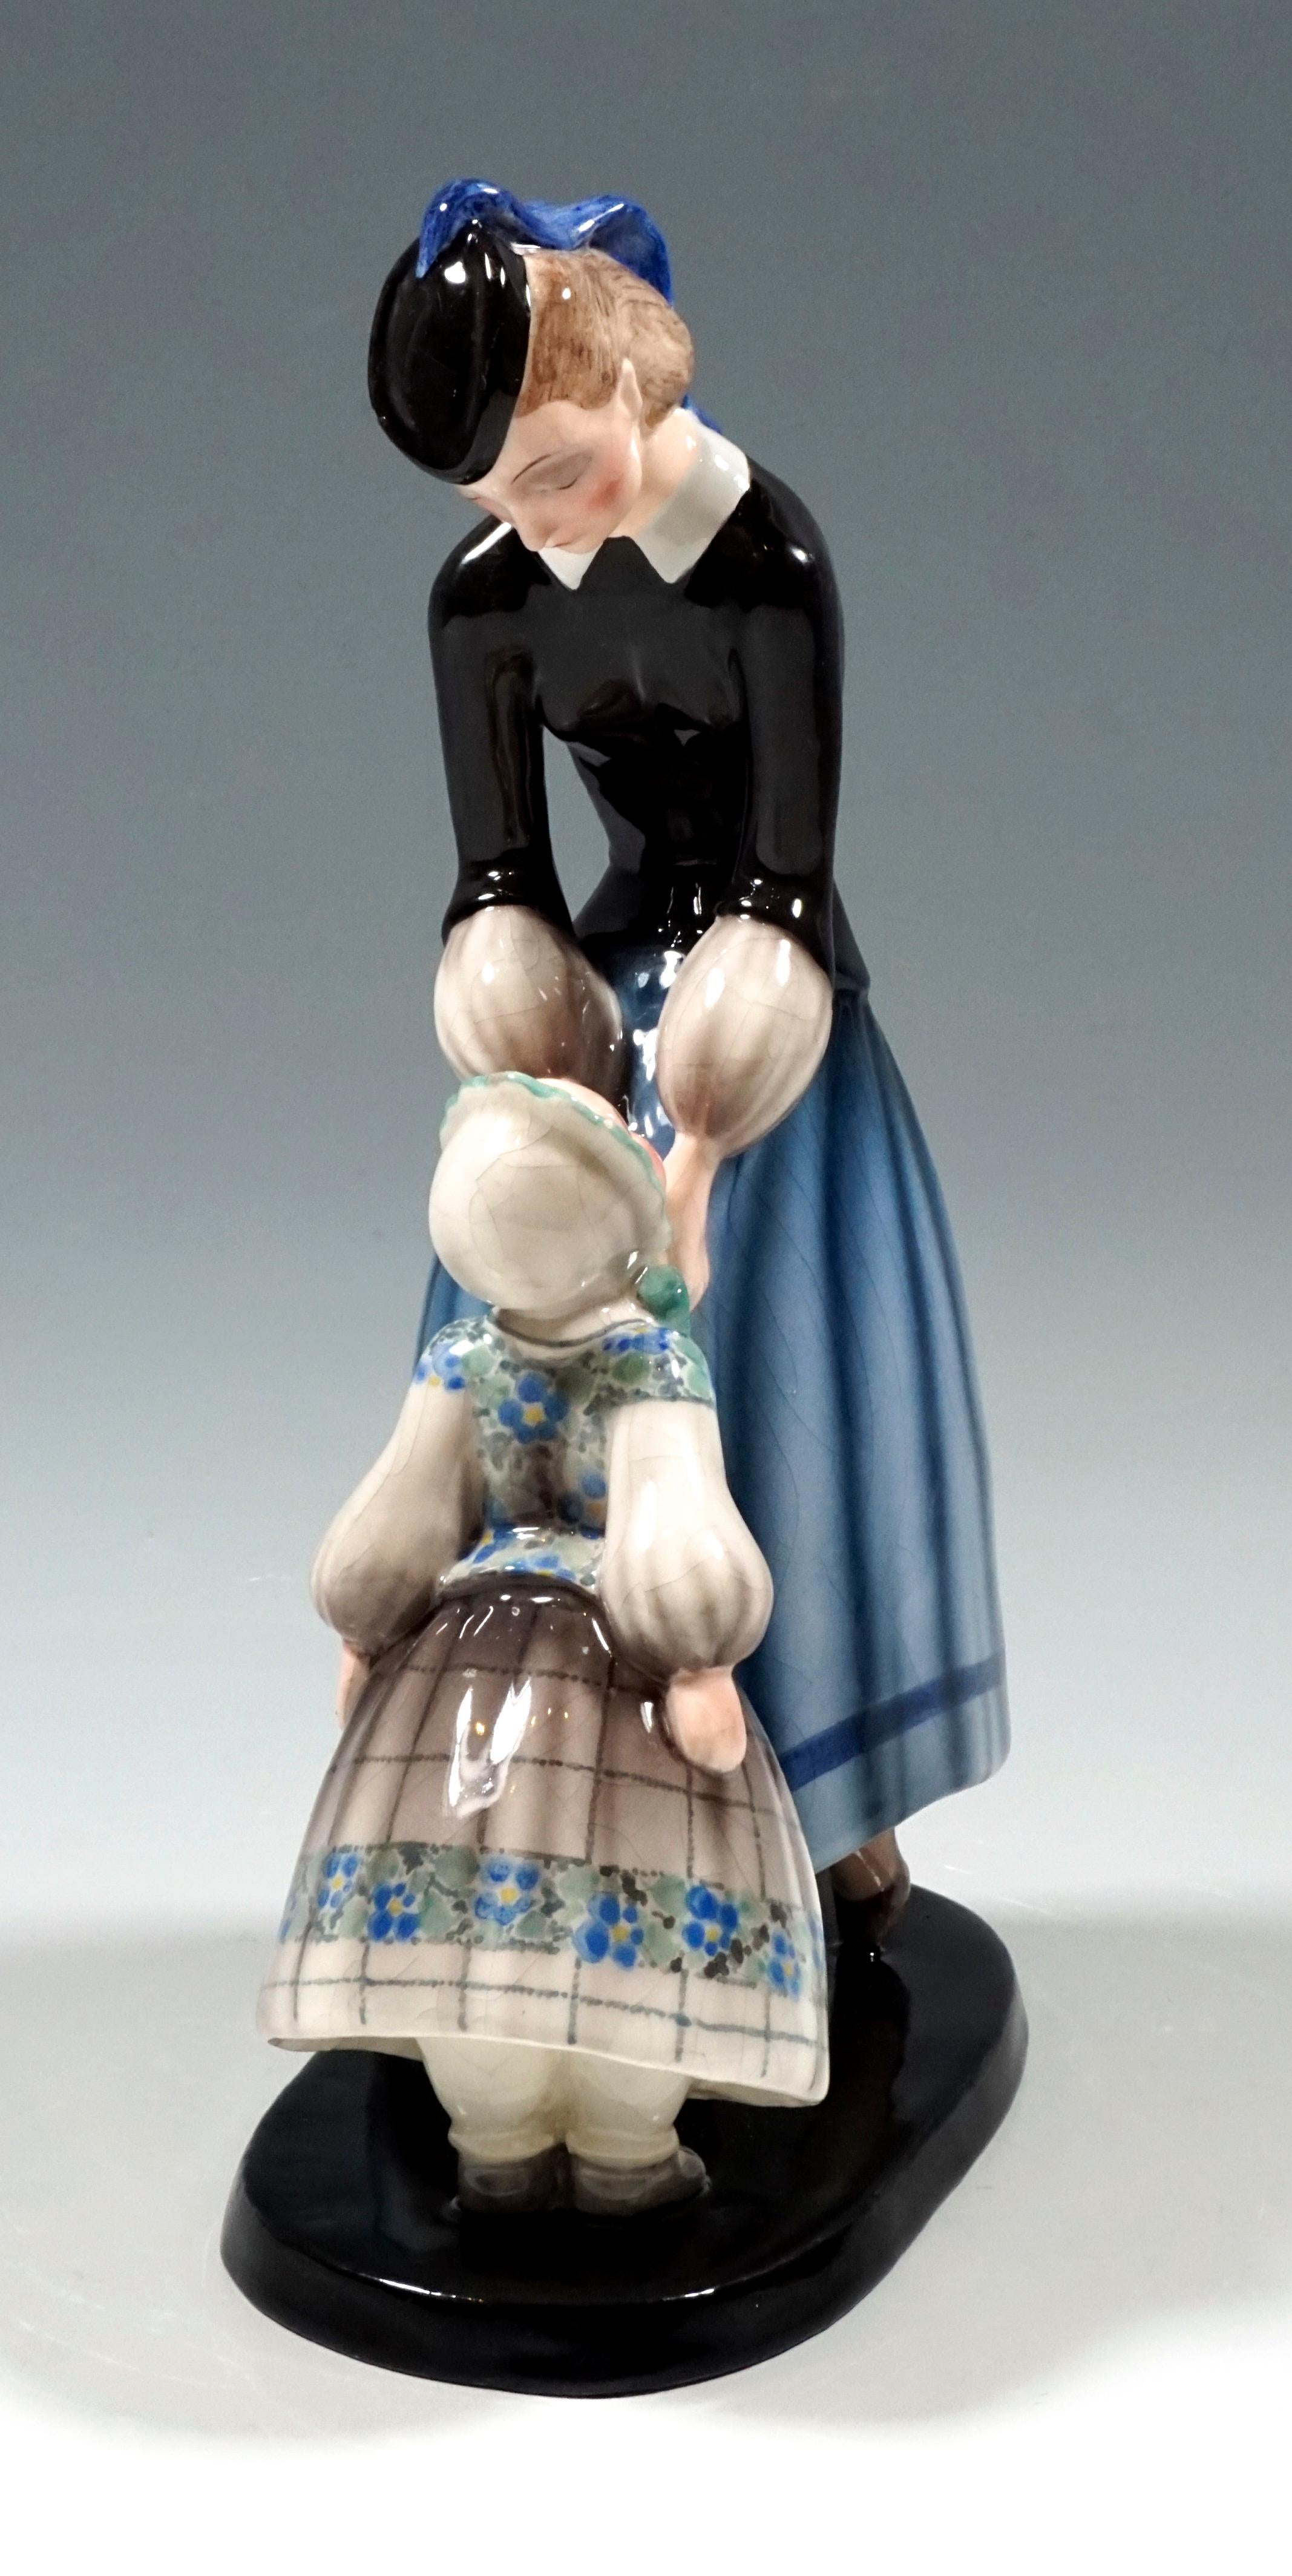 Especially rare Goldscheider ceramic figurine group
The woman wears a black cap with a blue bow that falls on her back, a black fitted jacket over a white blouse and a long, wide, blue skirt. She bends forward and reverently ties the bow around the